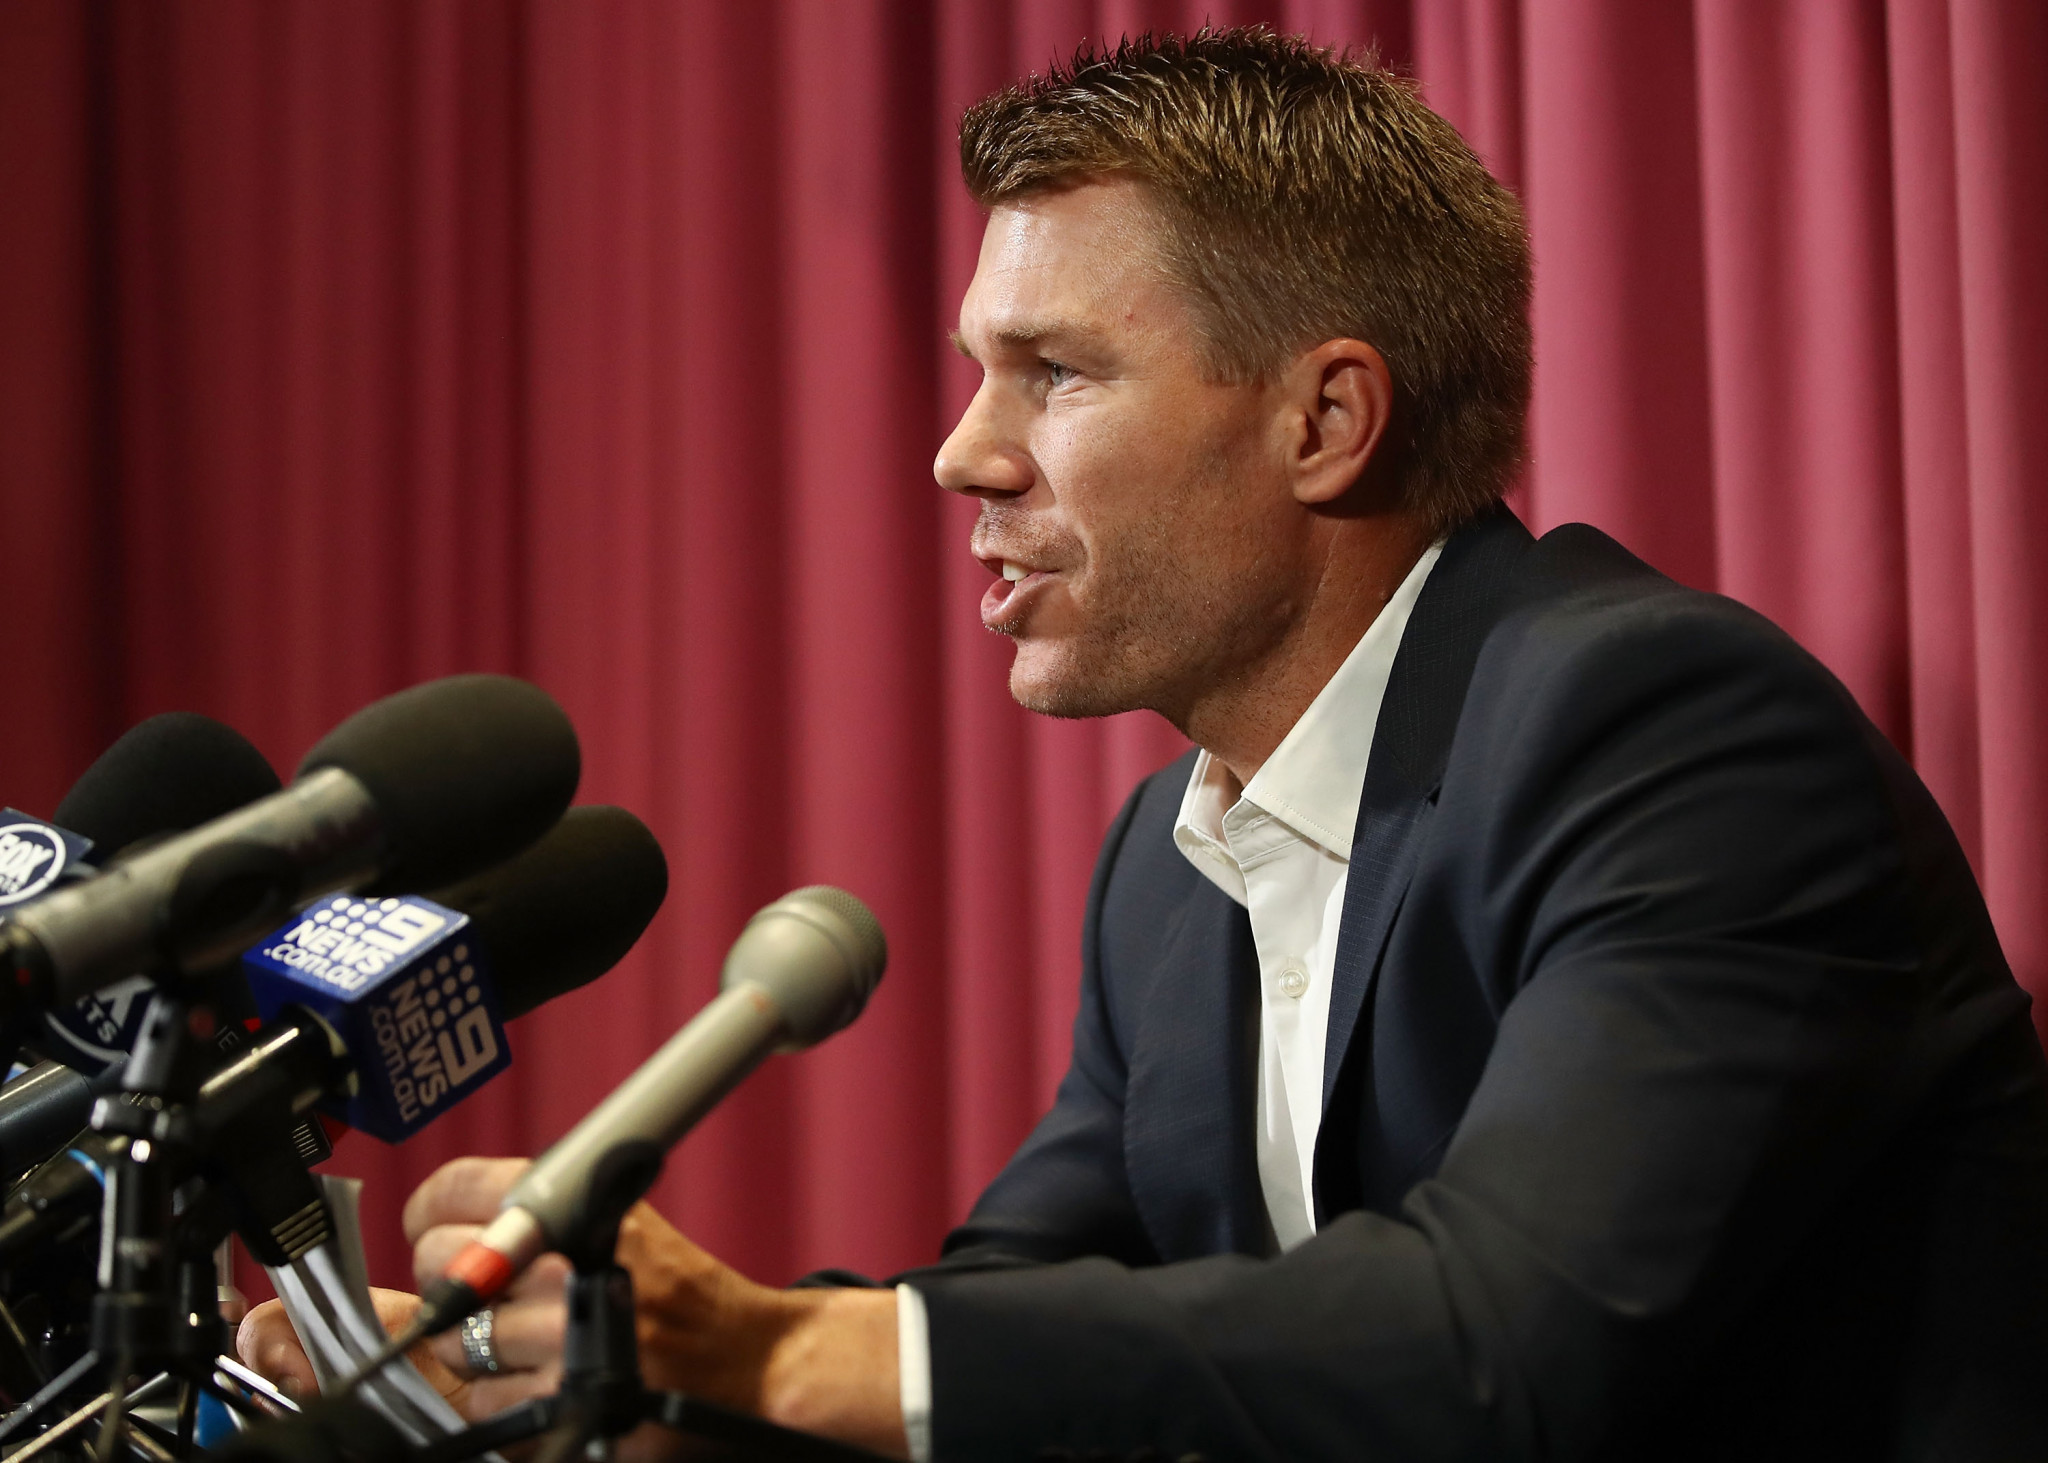 David Warner has accepted the sanction from Cricket Australia ©Getty Images